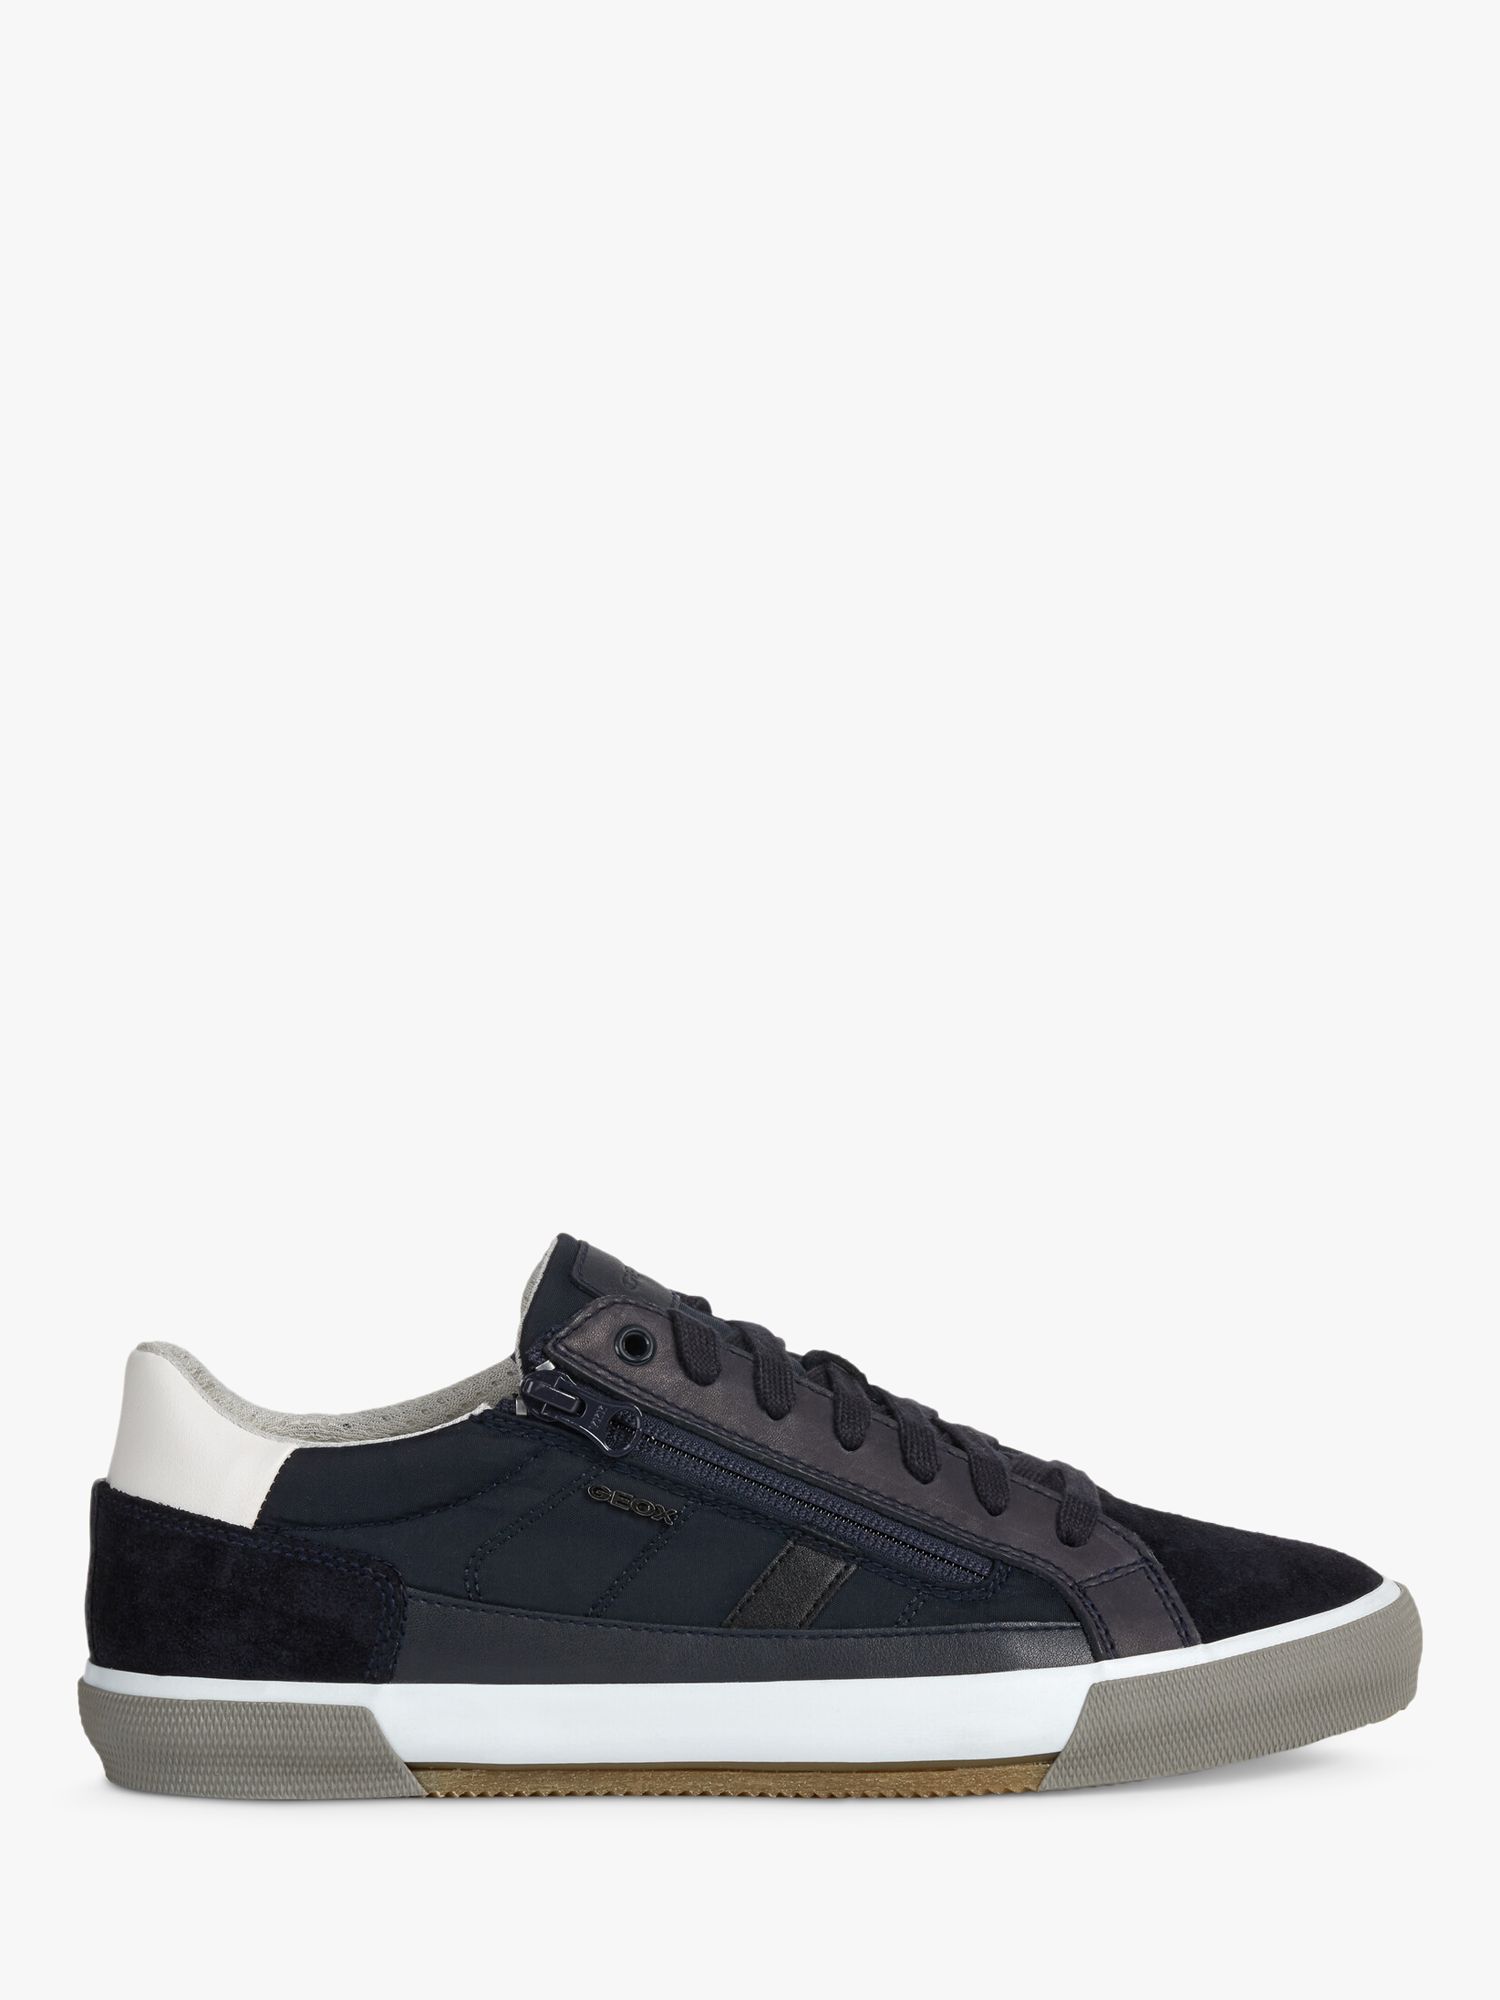 Geox Kaven Suede Trainers, Navy at John Lewis & Partners